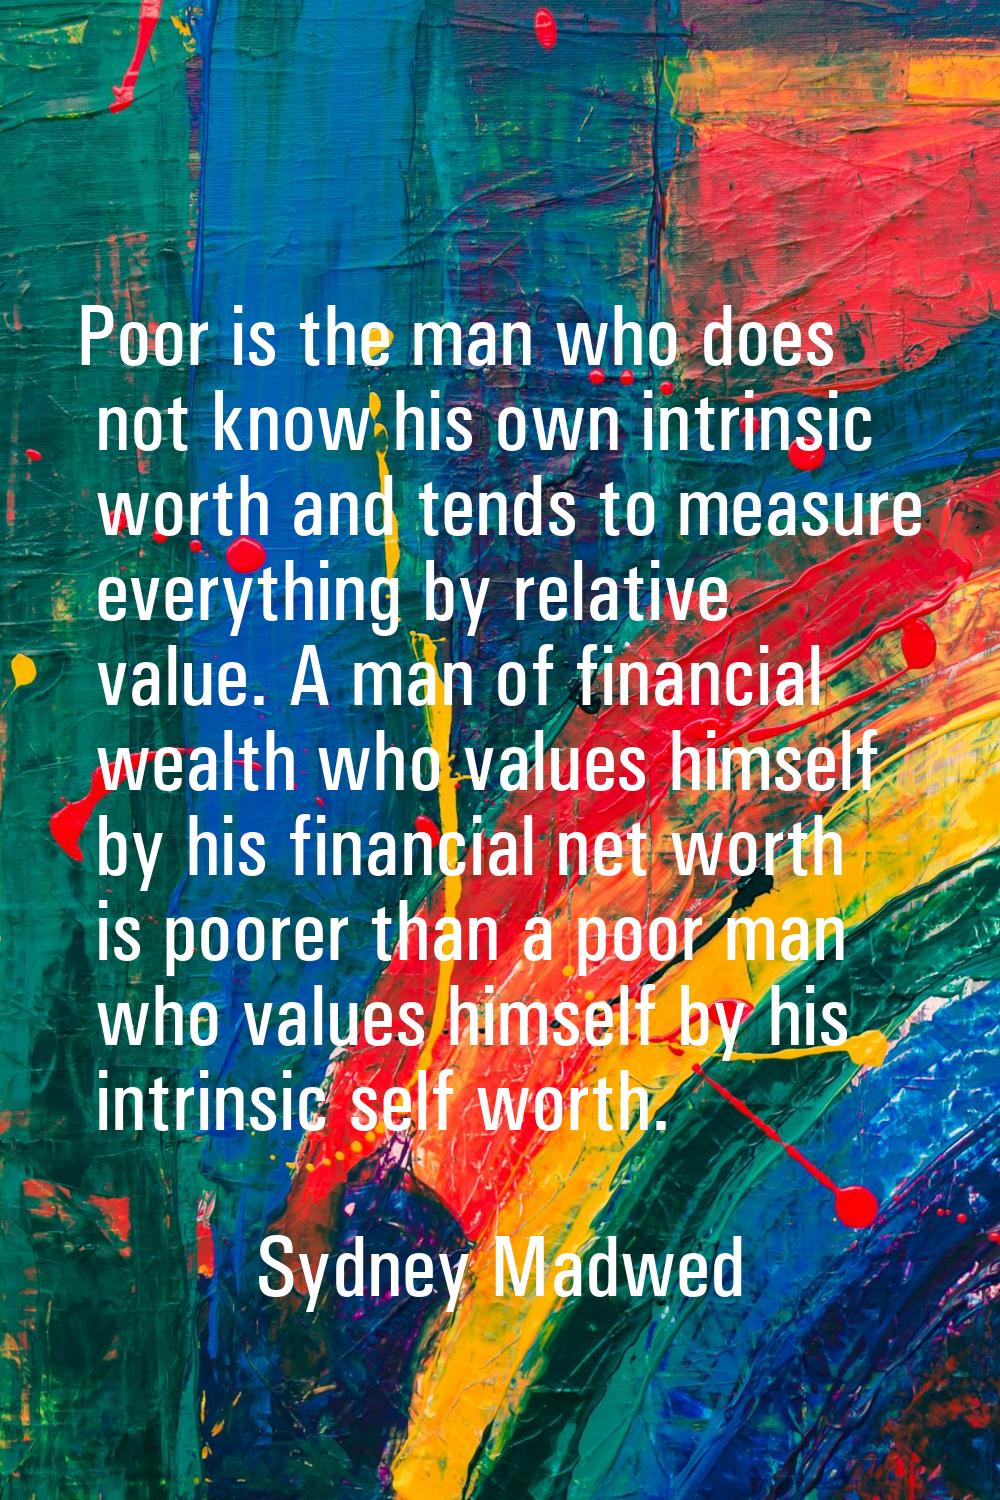 Poor is the man who does not know his own intrinsic worth and tends to measure everything by relati